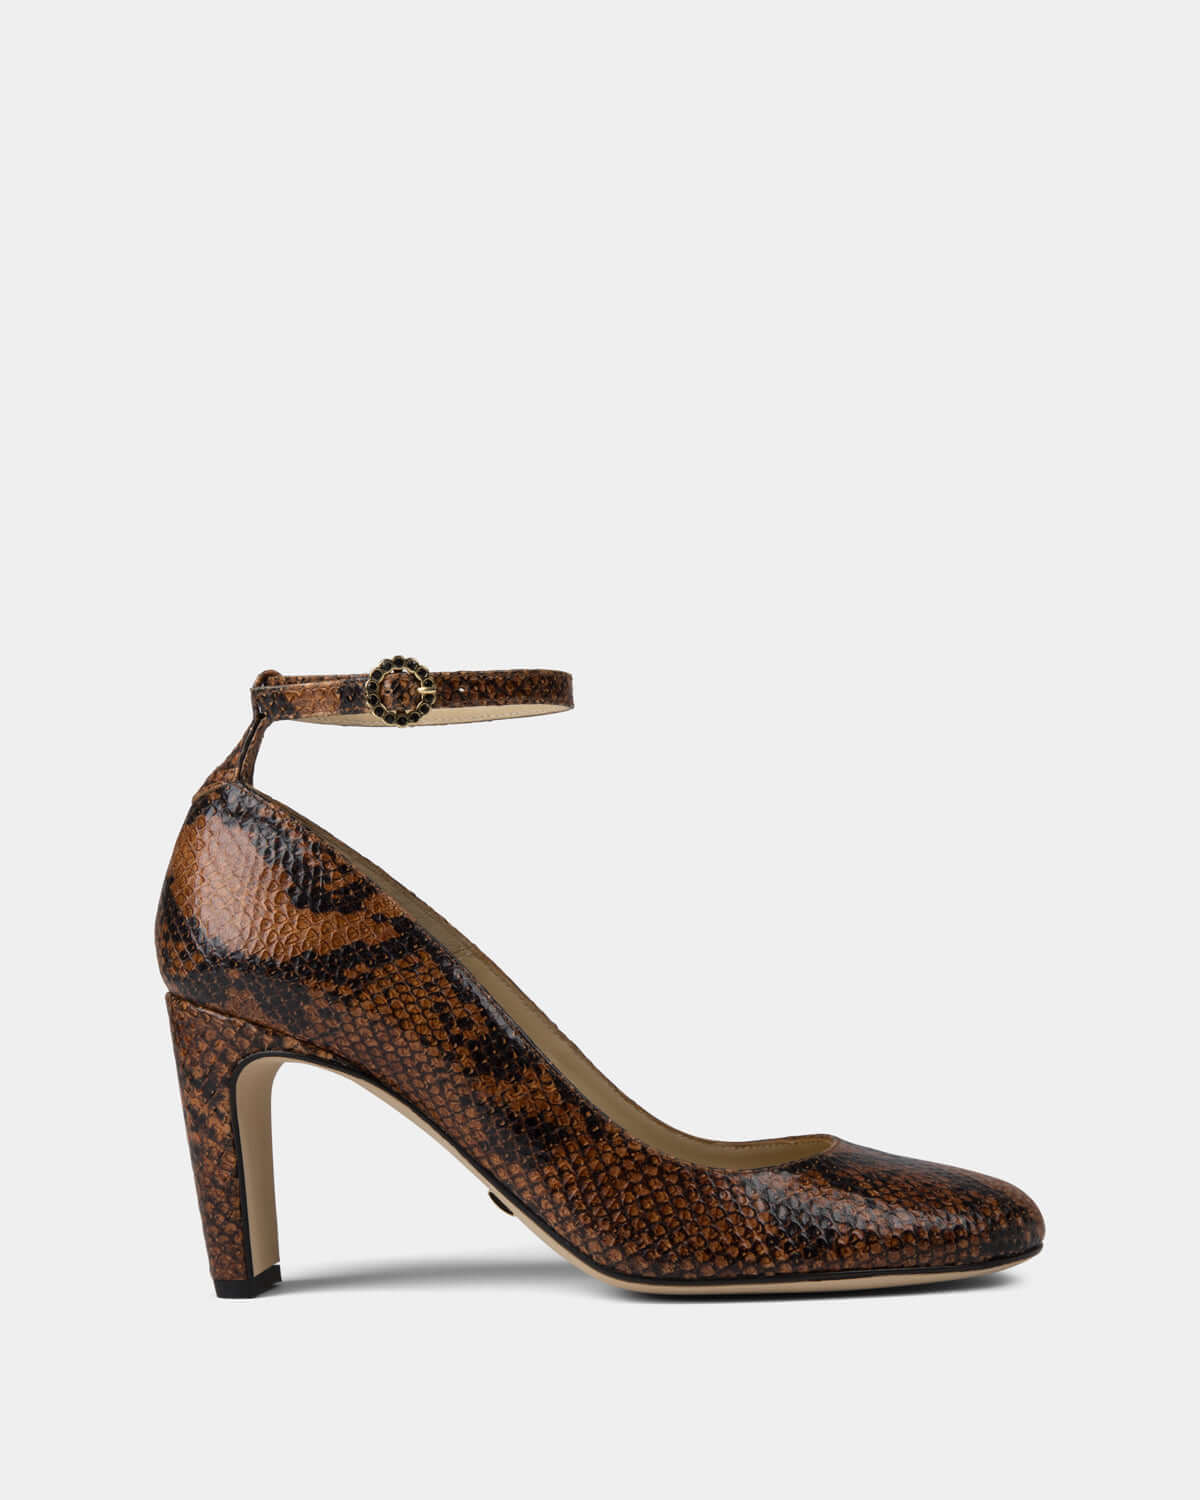 kallu-kallú-brown-snake-leather-shoes-for-women-made-in-spain-heels-shoes-high-heels-pums